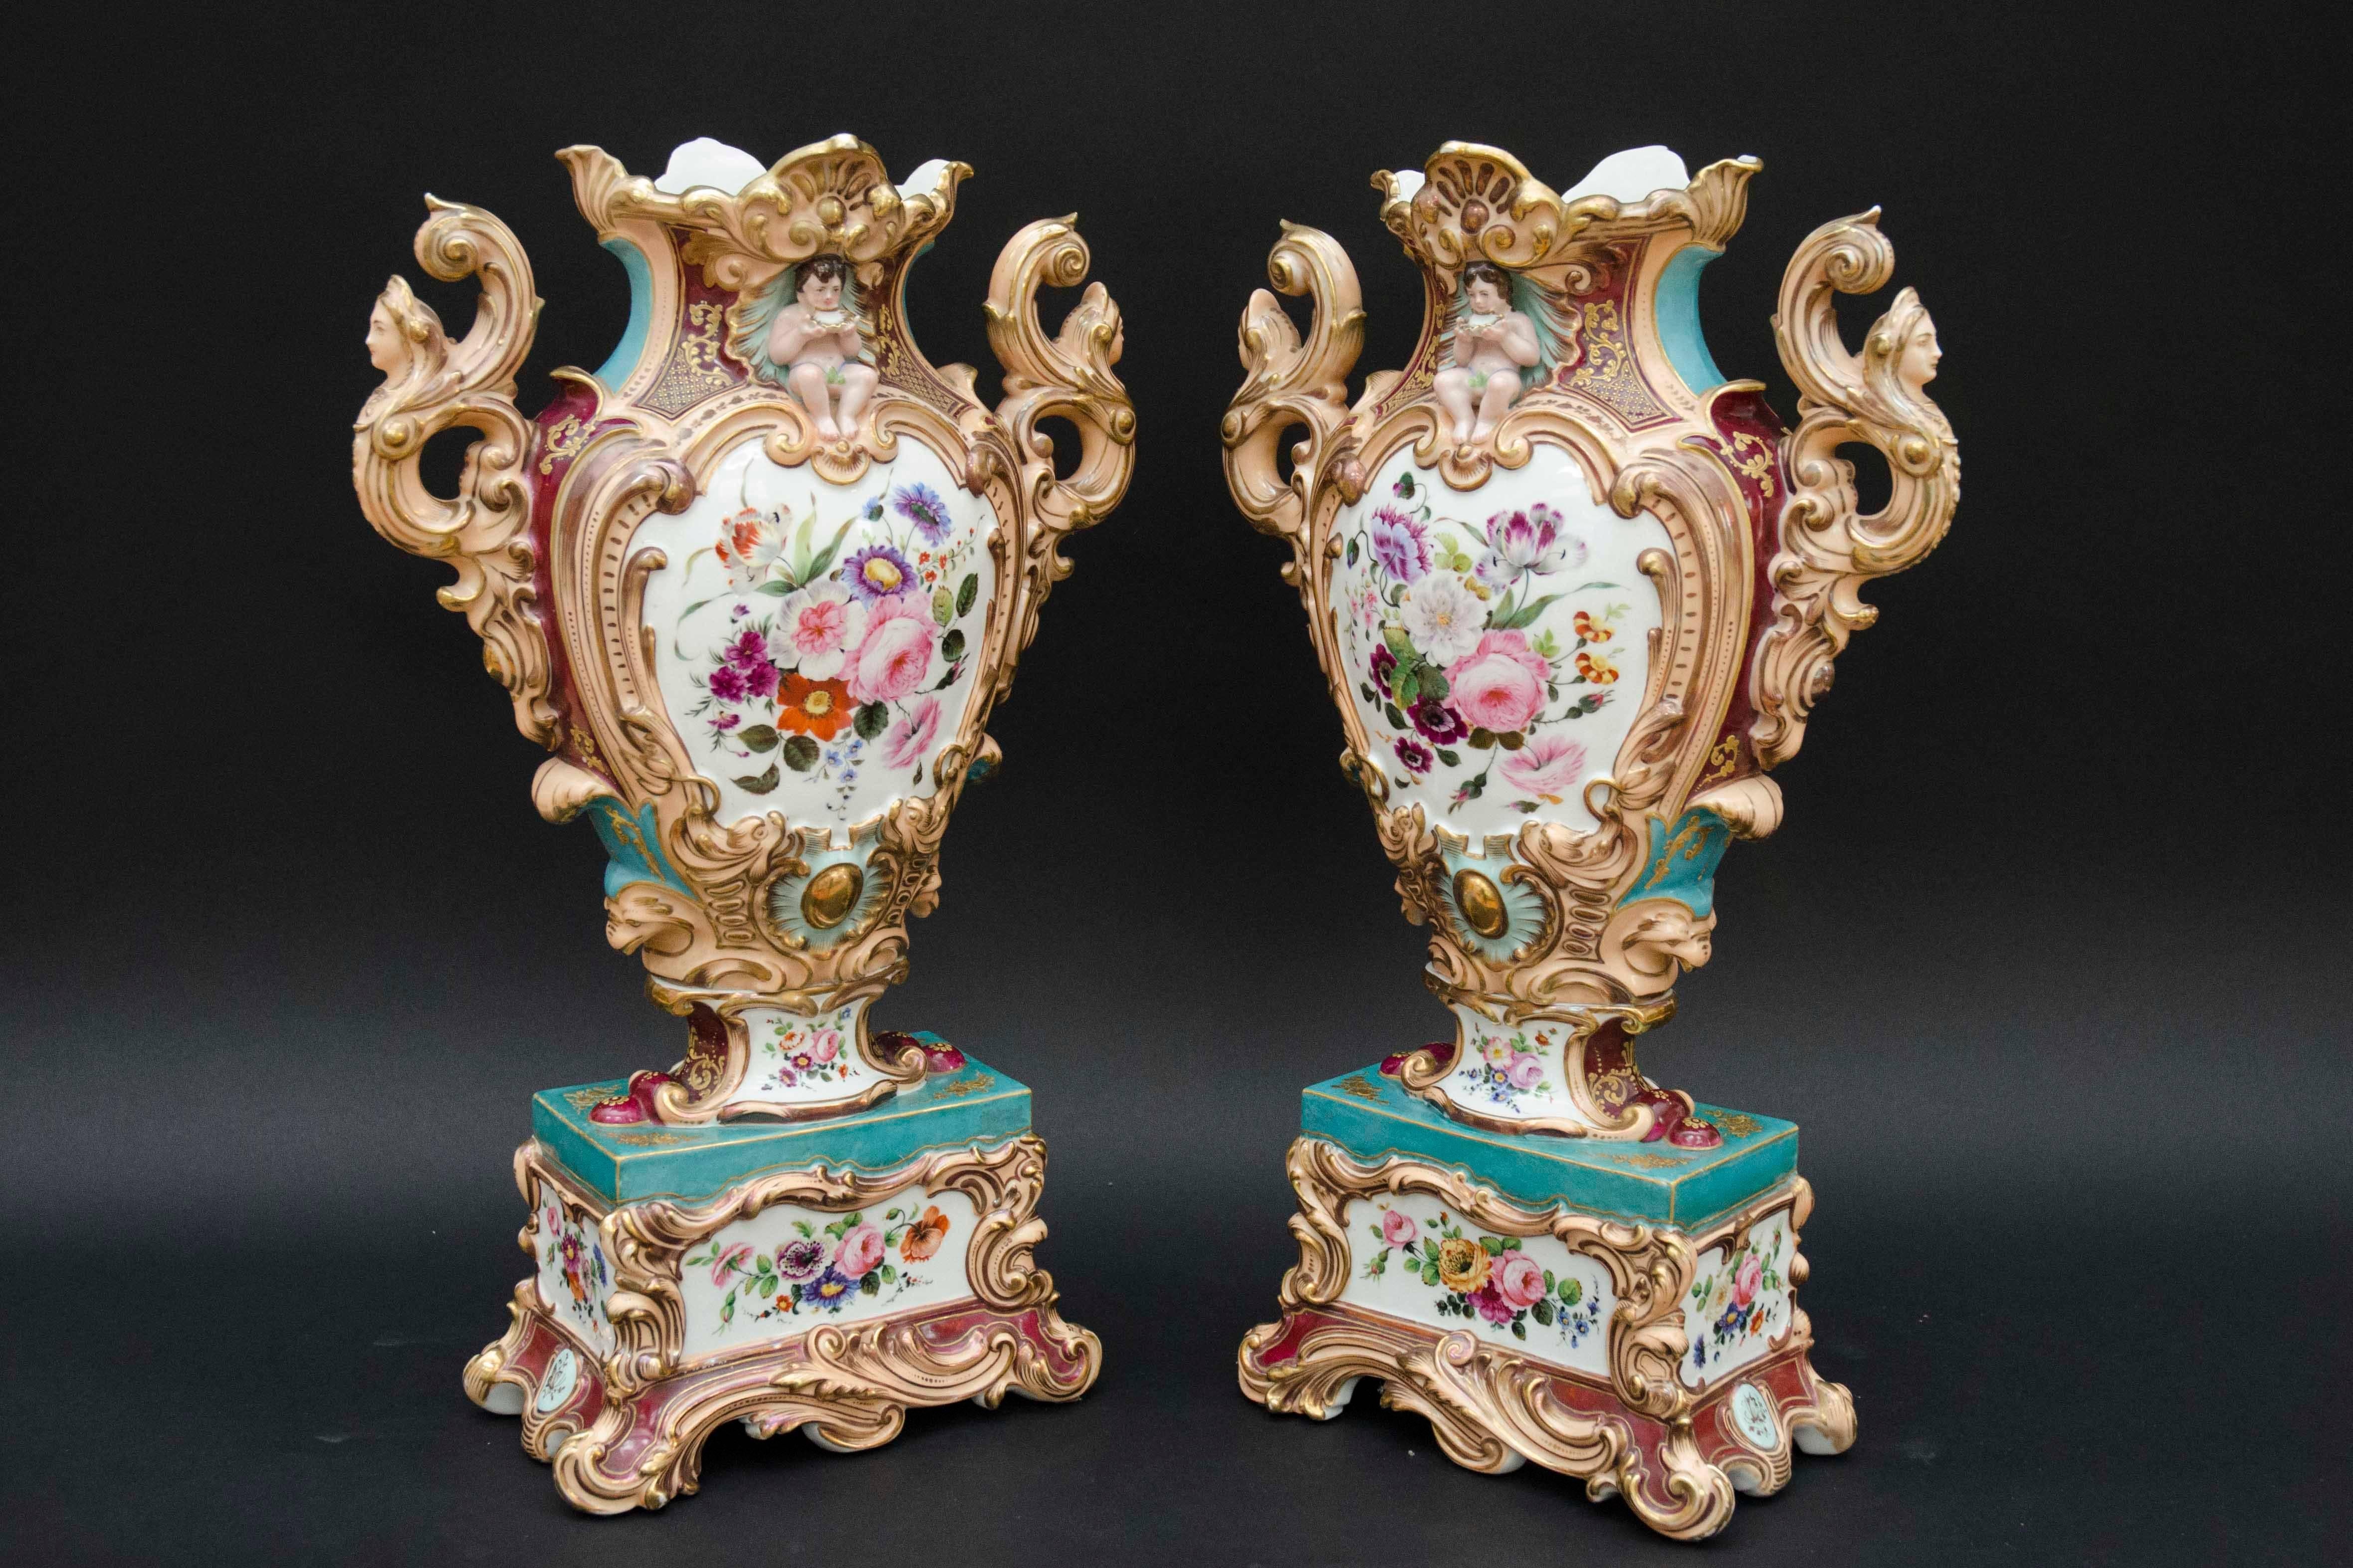 Large pair of very decorative 19th century rococo vases with flowers with colorful grounds. Handles ending in women's busts on pink ground. On top of the vases, naked children sitting in a scallop, drinking from a smaller scallop. Gilt highlights.